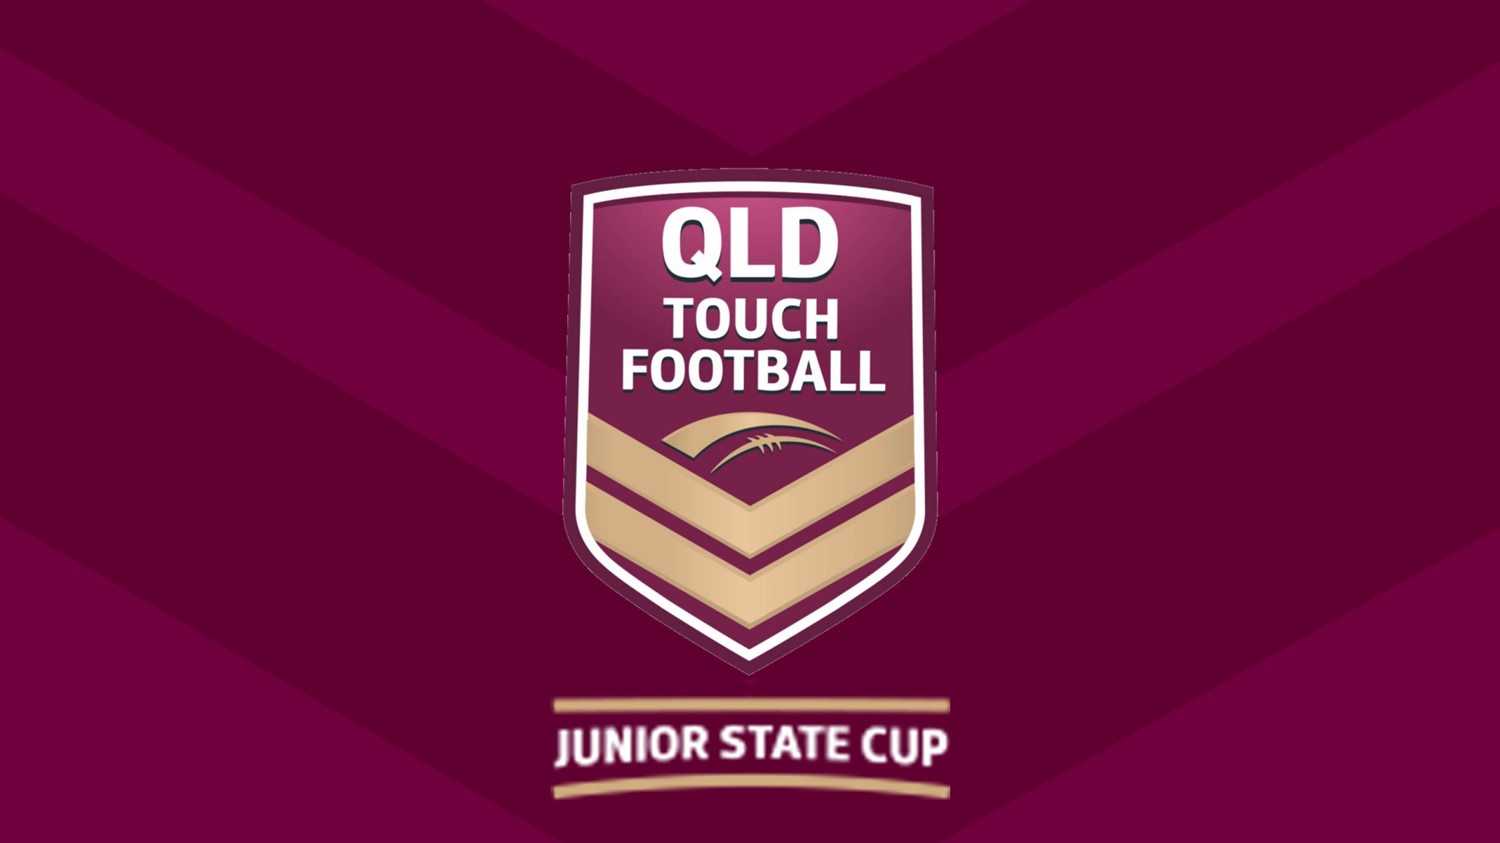 210708-QLD Junior State Cup 18 Girls - Hervey Bay v Toowoomba Twisters Minigame Slate Image